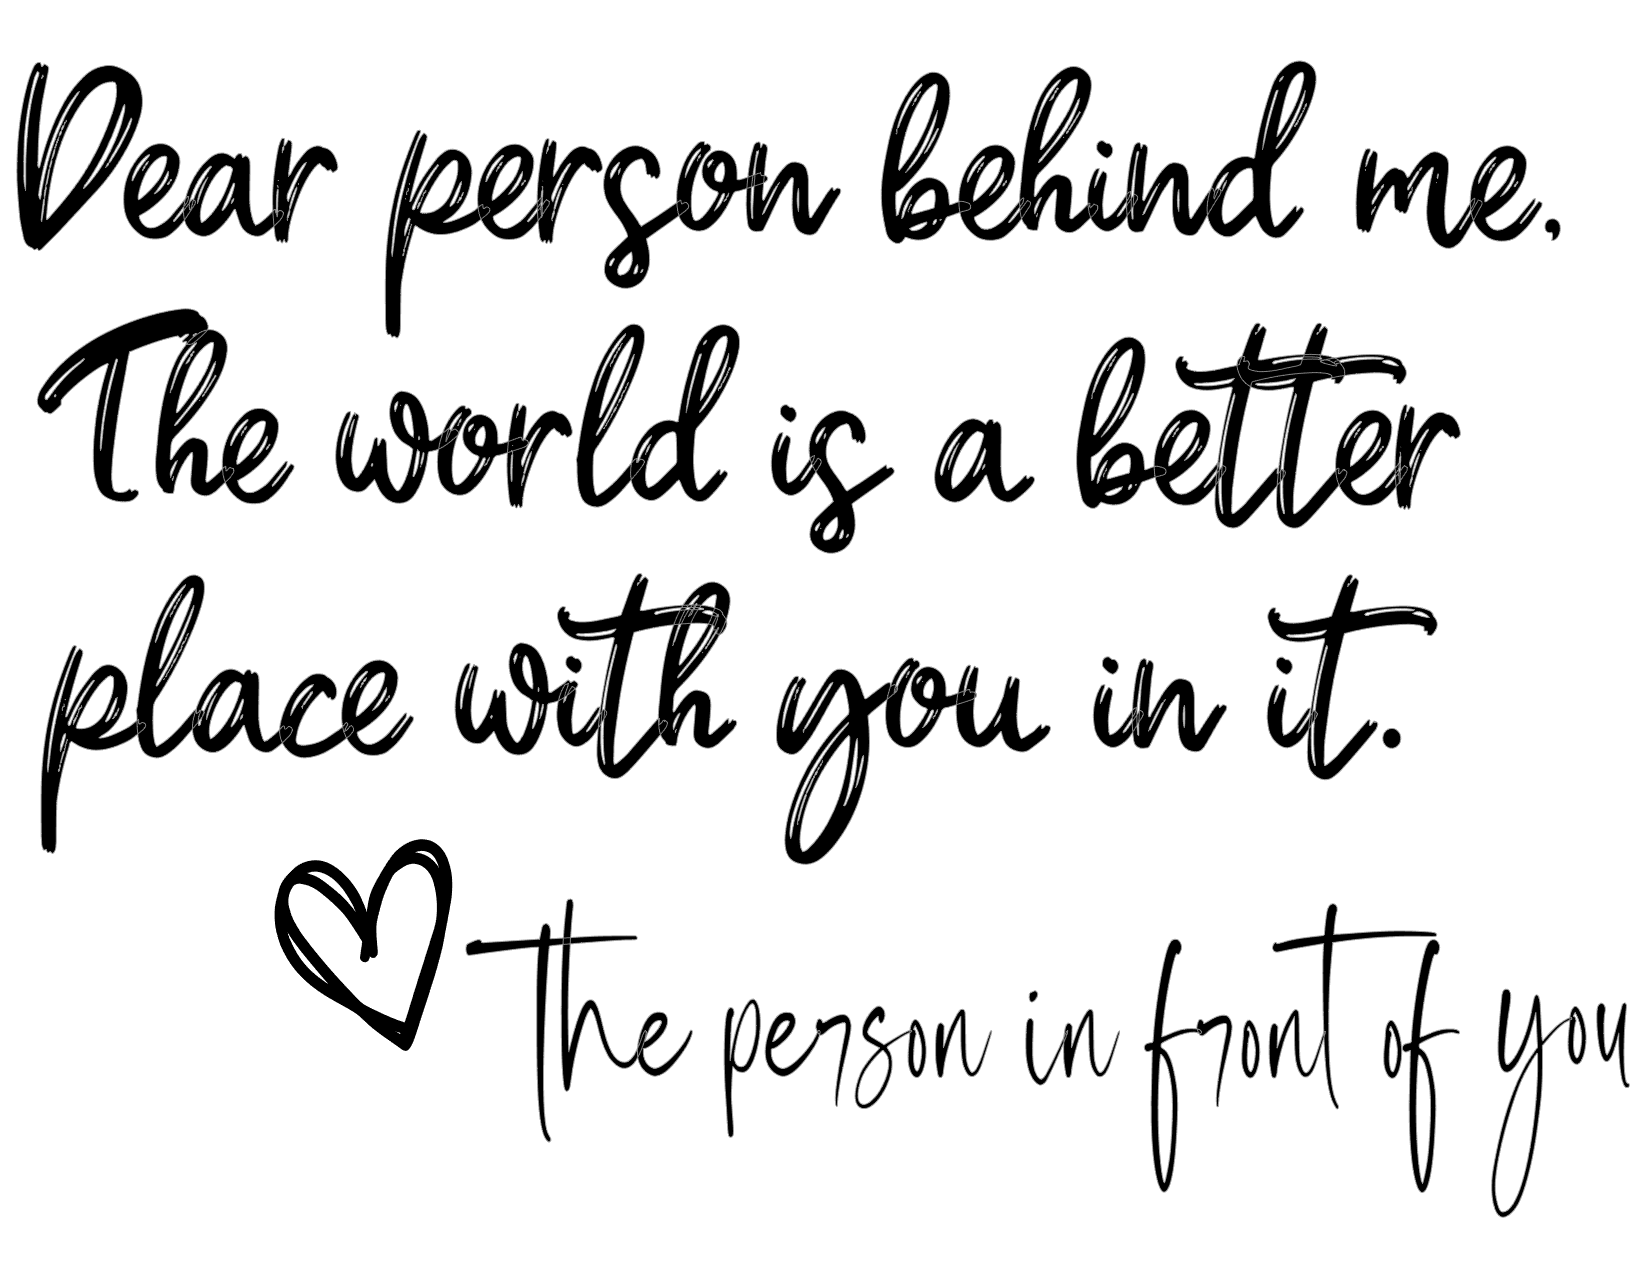 #280 Dear Person Behind Me The World Is A Better Place With You In It (Be Kind)